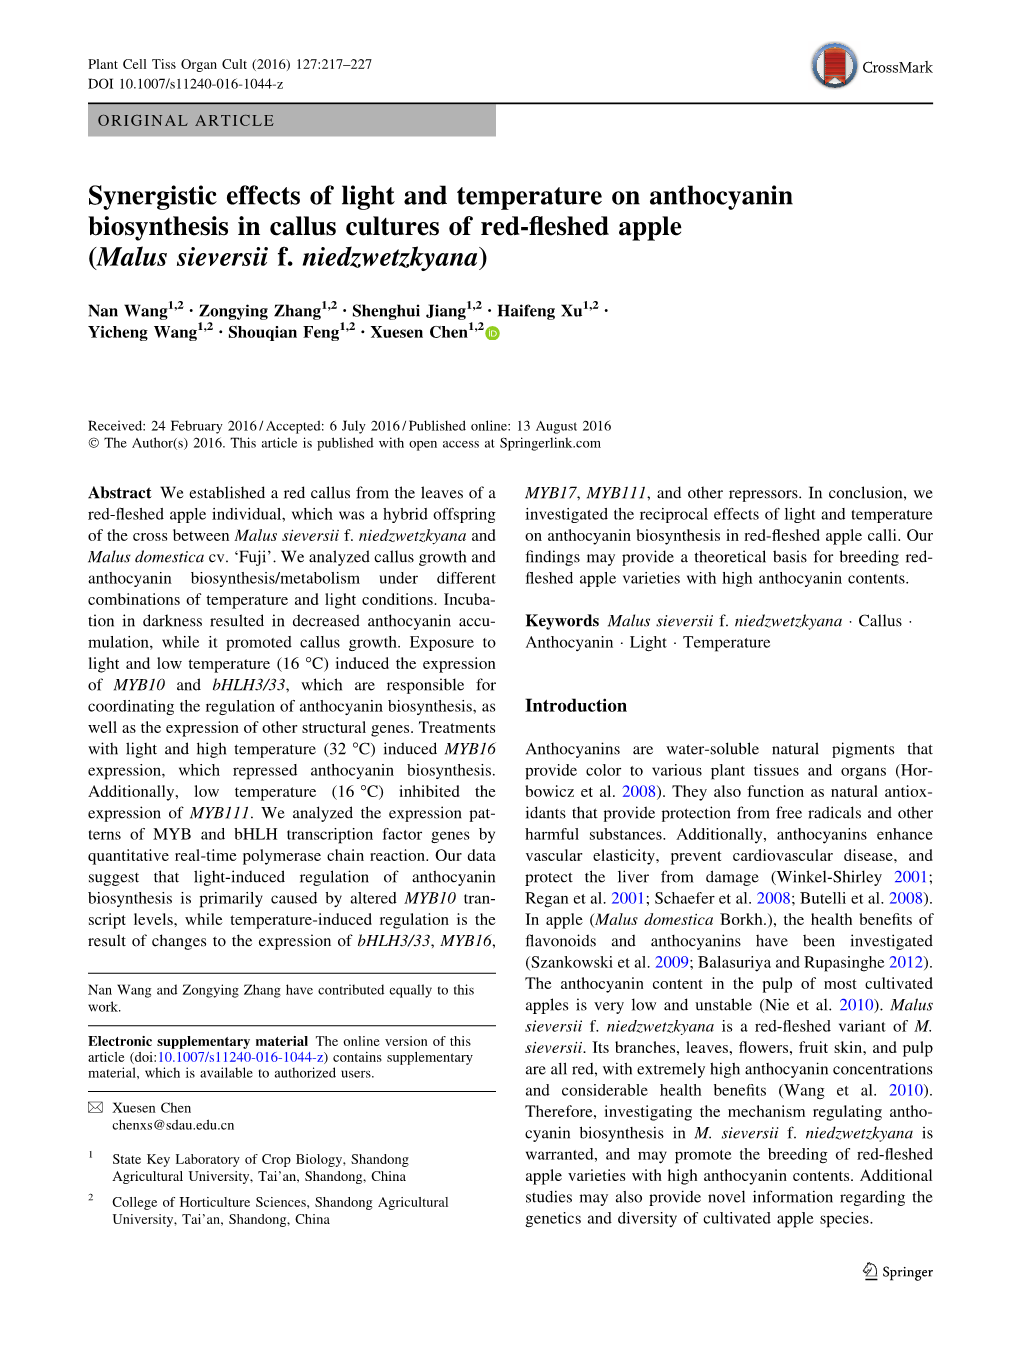 Synergistic Effects of Light and Temperature on Anthocyanin Biosynthesis in Callus Cultures of Red-ﬂeshed Apple (Malus Sieversii F